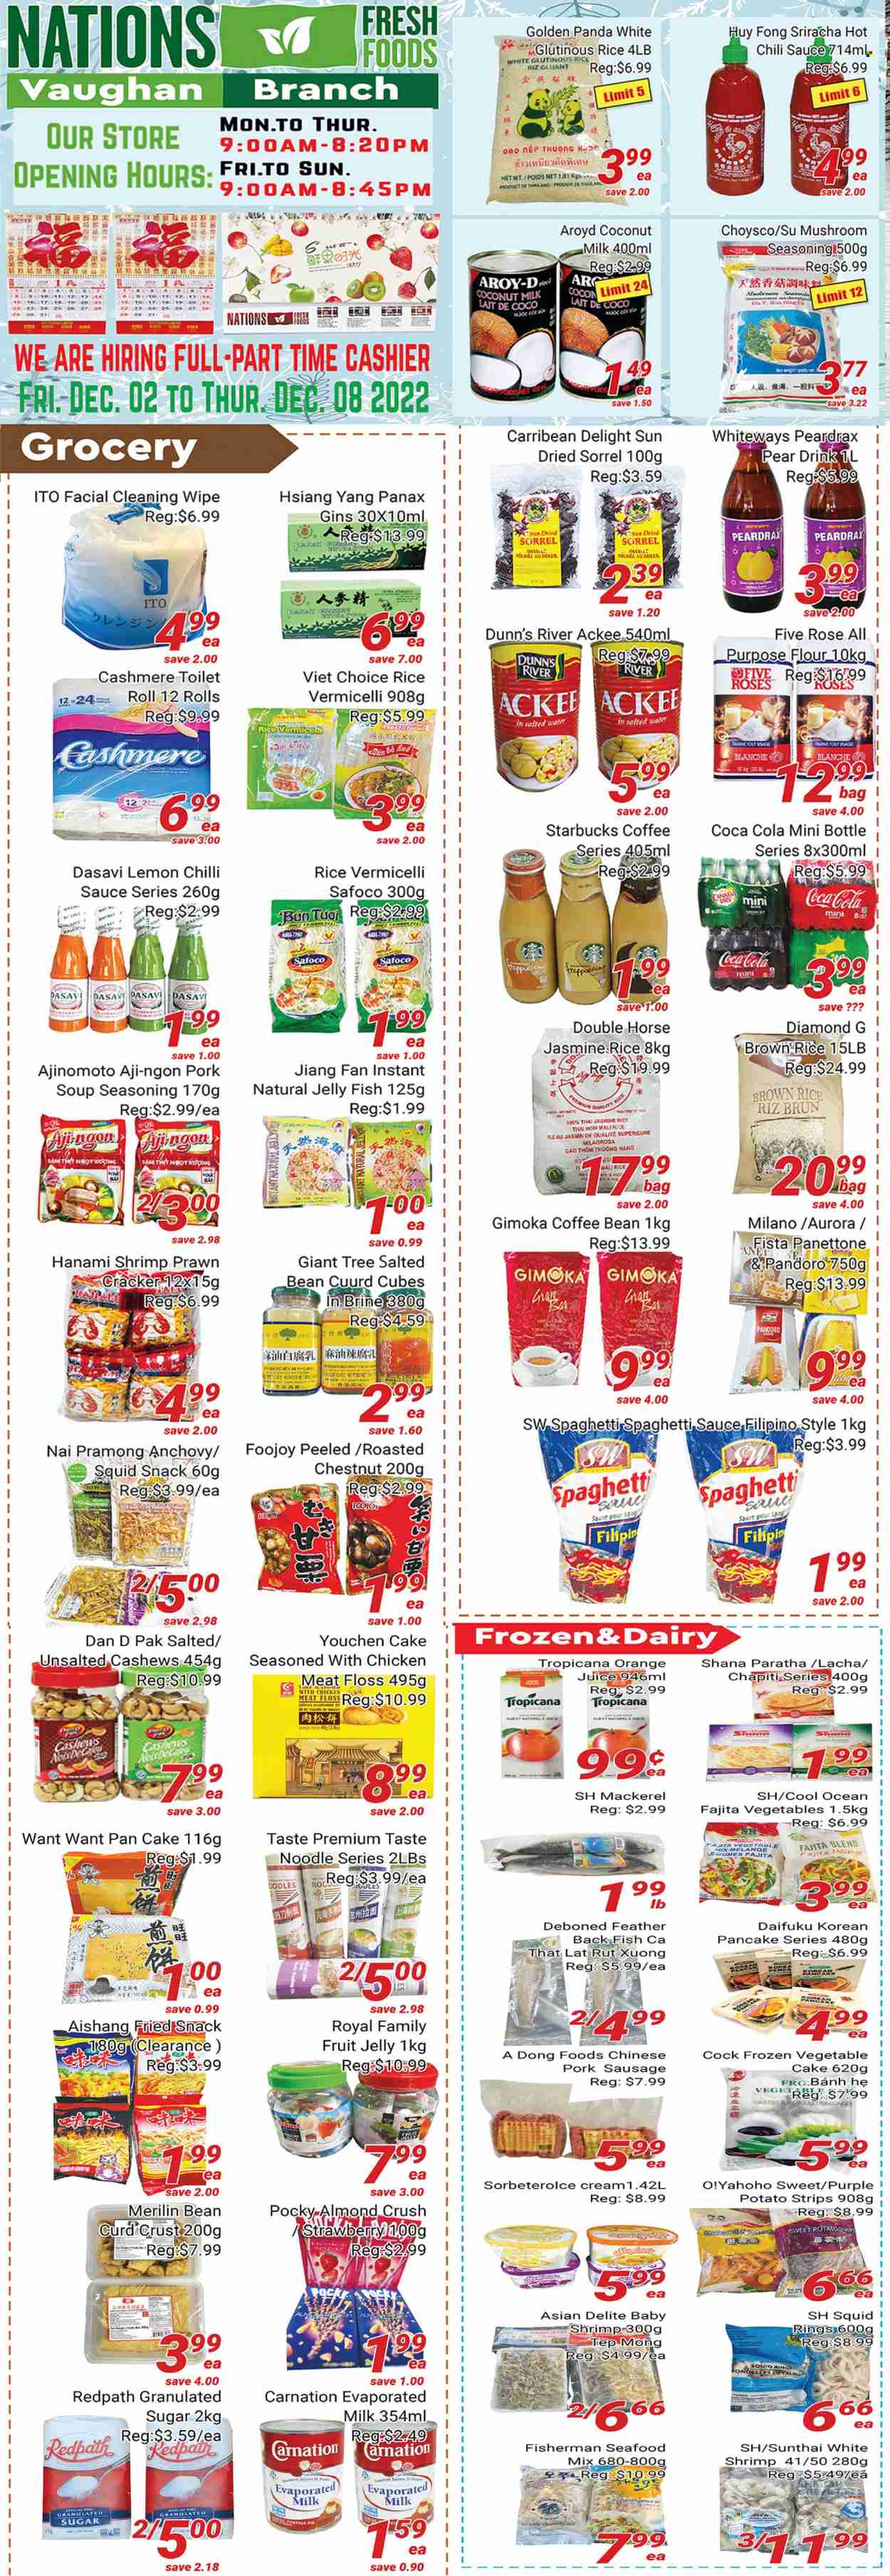 thumbnail - Nations Fresh Foods Flyer - December 02, 2022 - December 08, 2022 - Sales products - cake, pie, panettone, sweet potato, pumpkin, pears, mackerel, squid, seafood, prawns, fish, shrimps, squid rings, spaghetti, soup, sauce, pancakes, noodles, spaghetti sauce, fajita mix, sausage, pork sausage, curd, evaporated milk, strips, snack, jelly, crackers, all purpose flour, flour, granulated sugar, sugar, anchovies, coconut milk, brown rice, rice, jasmine rice, rice vermicelli, spice, sriracha, chilli sauce, cashews, Canada Dry, Coca-Cola, orange juice, juice, coffee, Starbucks, frappuccino, rosé wine, chicken. Page 1.